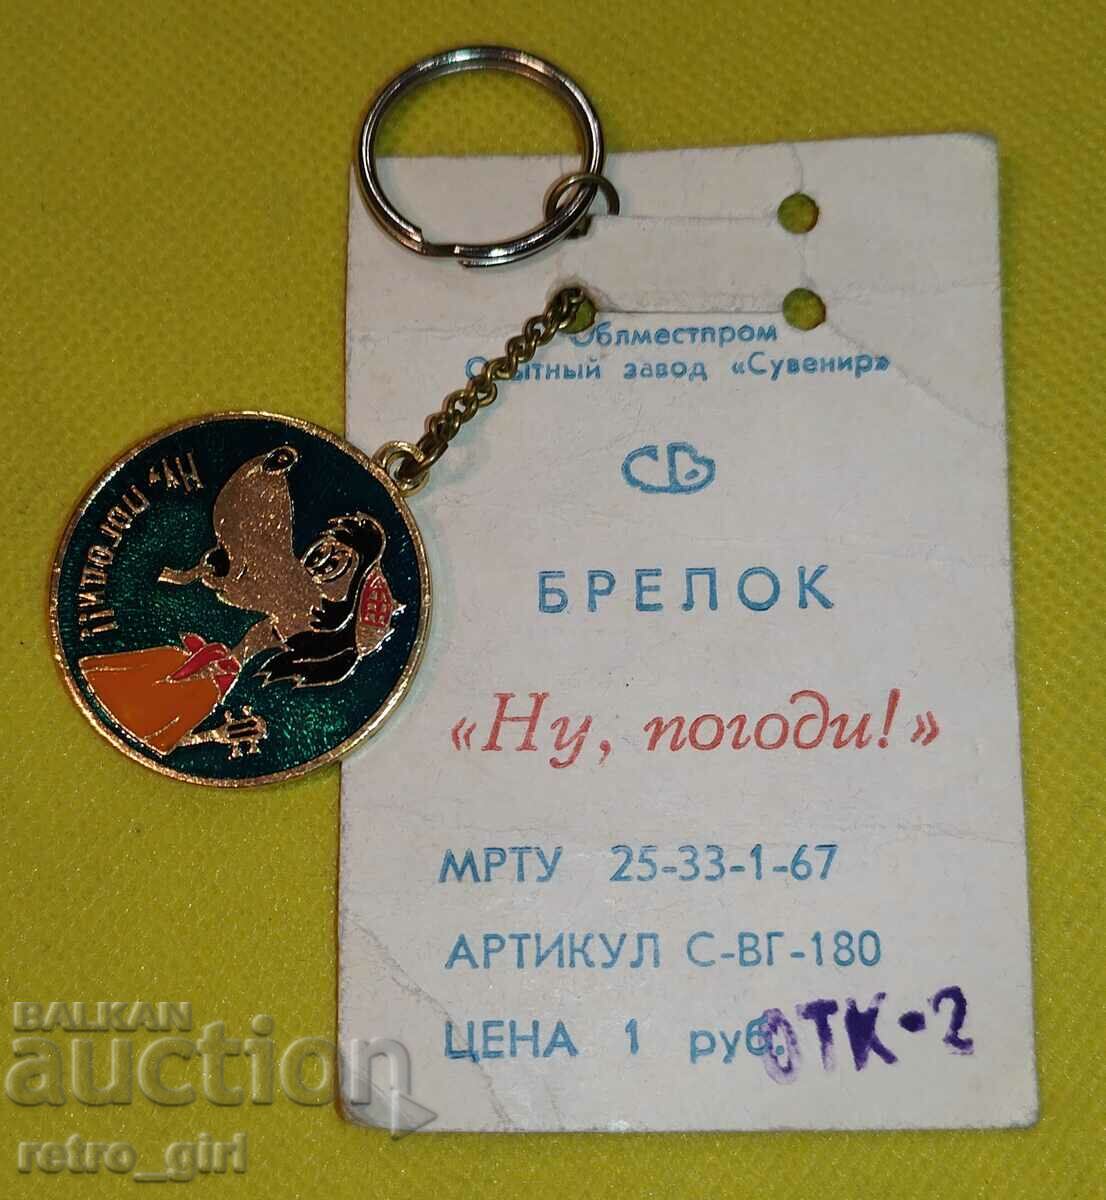 I am selling an old key chain.